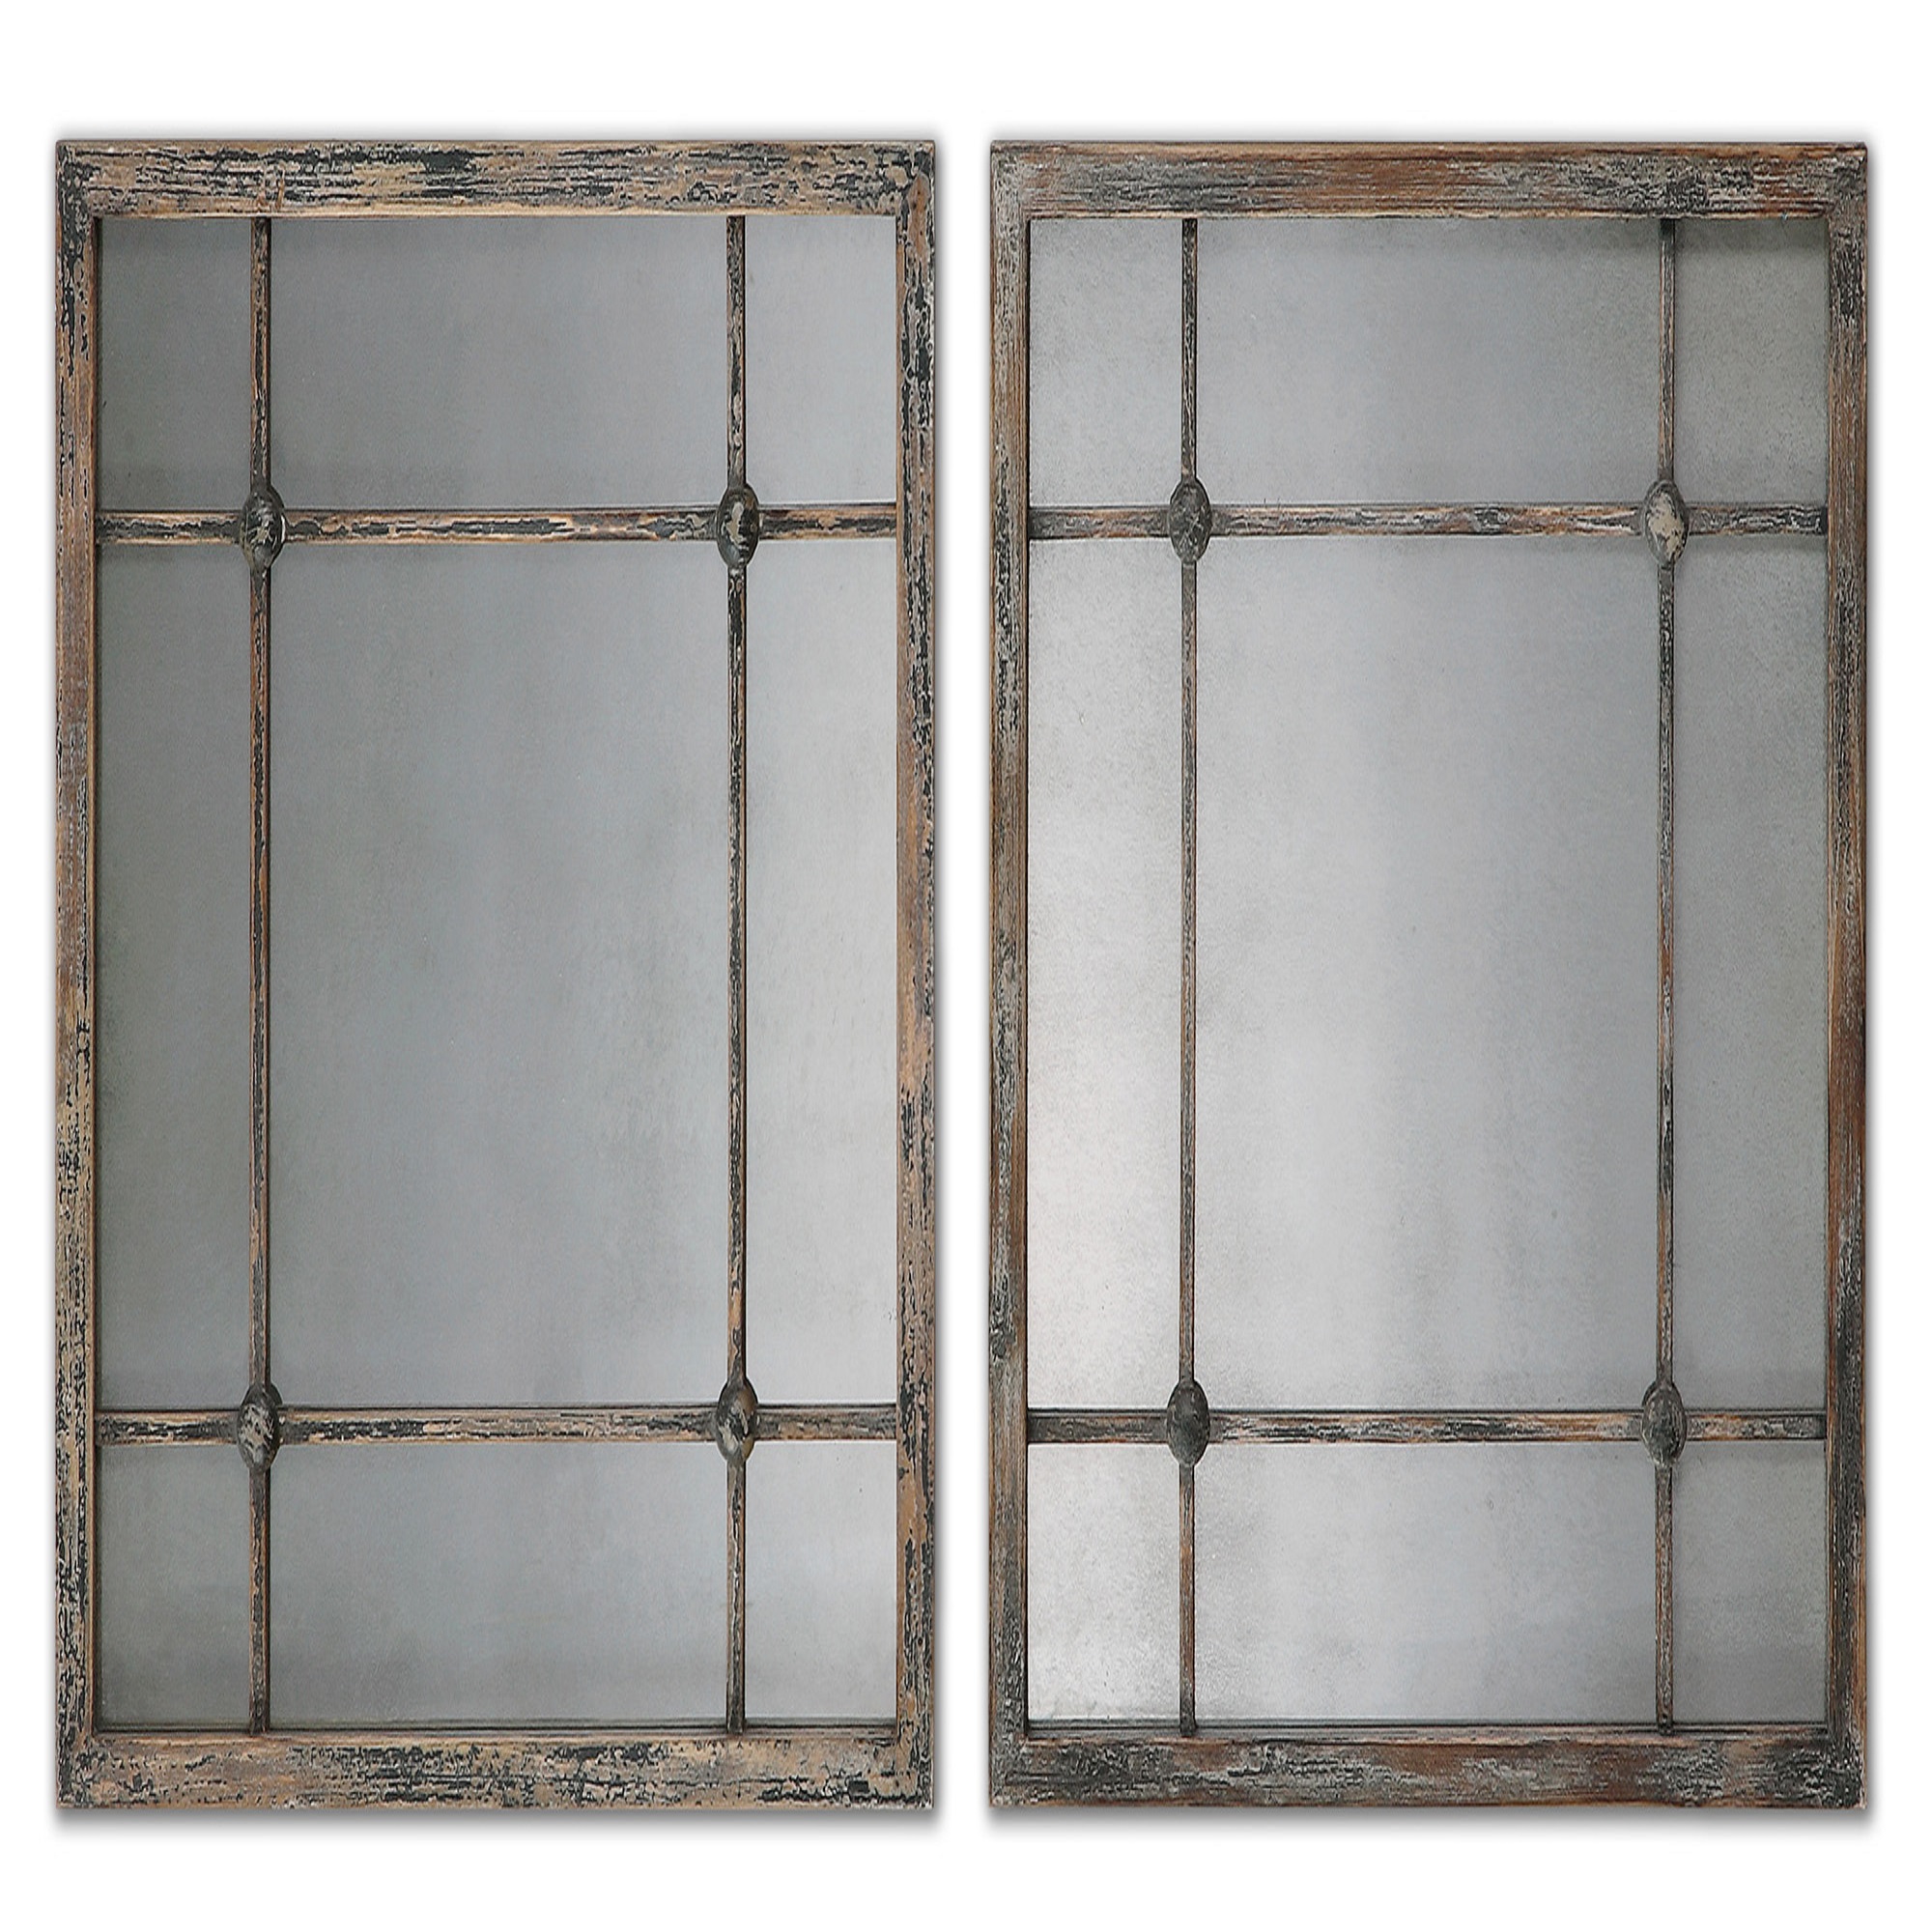 Diva At Home Set of 2 Distressed Blue and Ivory Wood Framed Antiqued Square Wall Mirrors